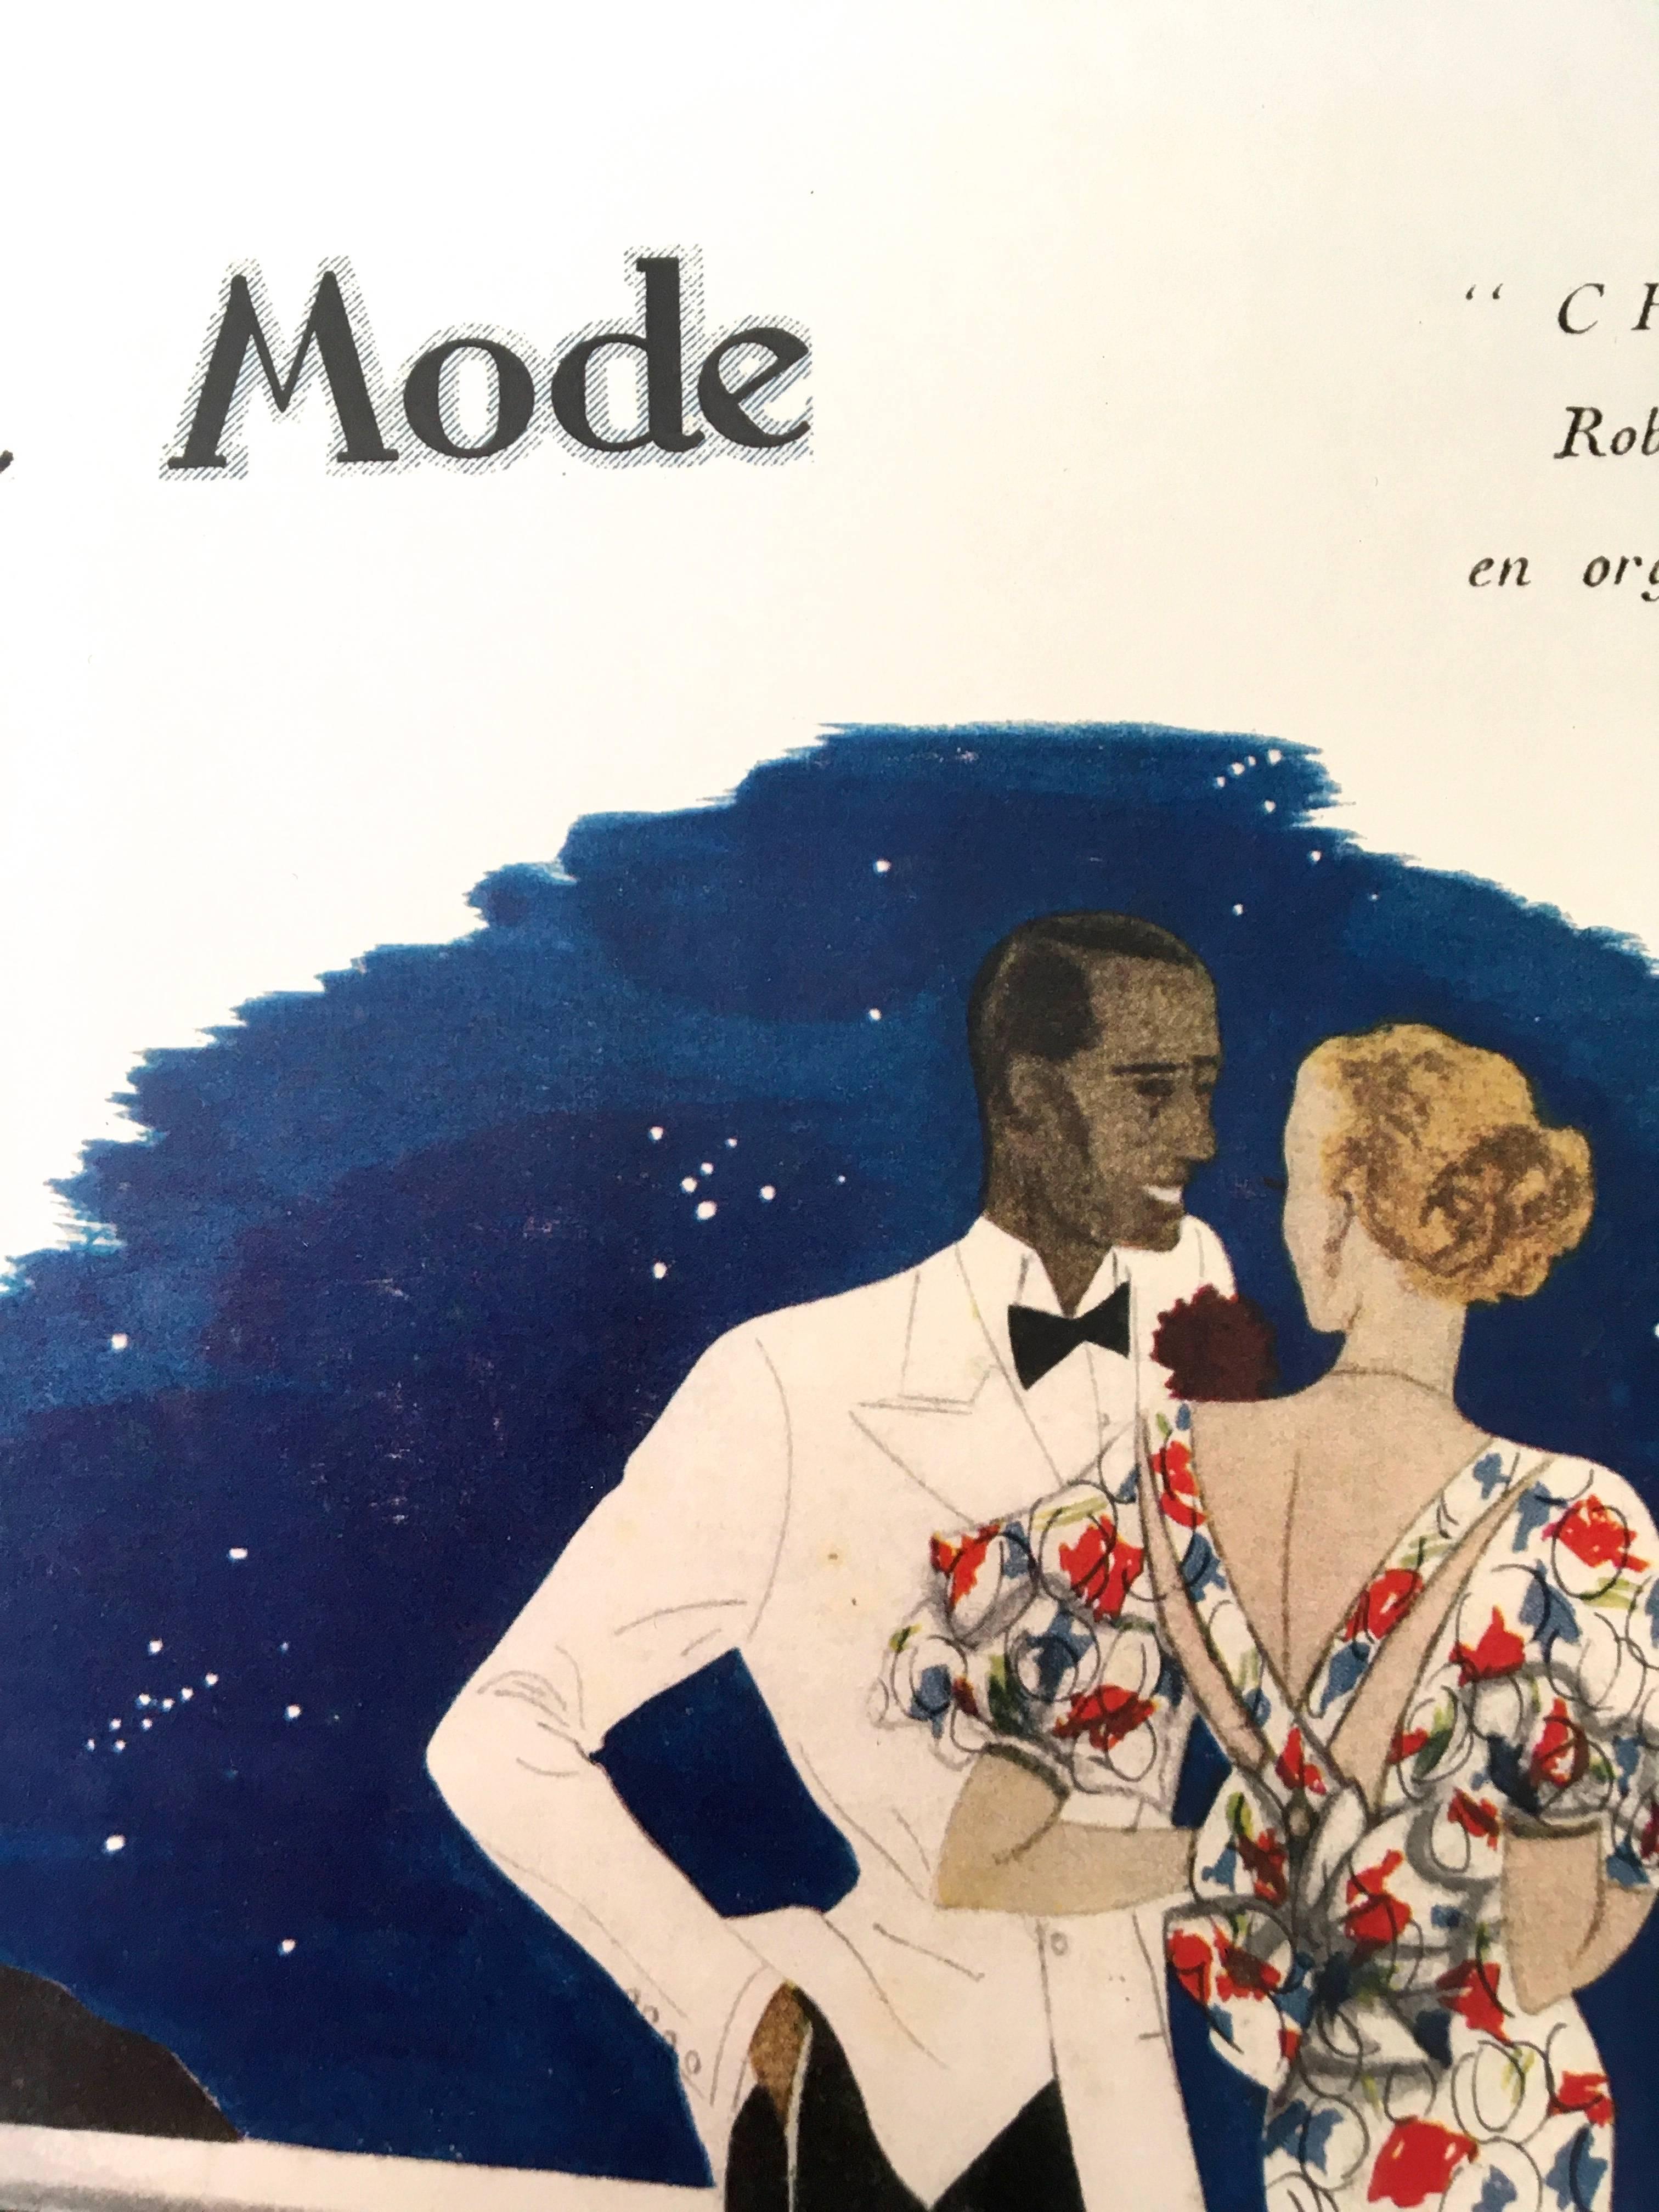 This Chanel print advertisement is a limited release print after the original advertisement in the 1930's. The print features a couple overlooking a night sky. The women is dressed in a colorful flower evening gown. The gentleman is dressed in a